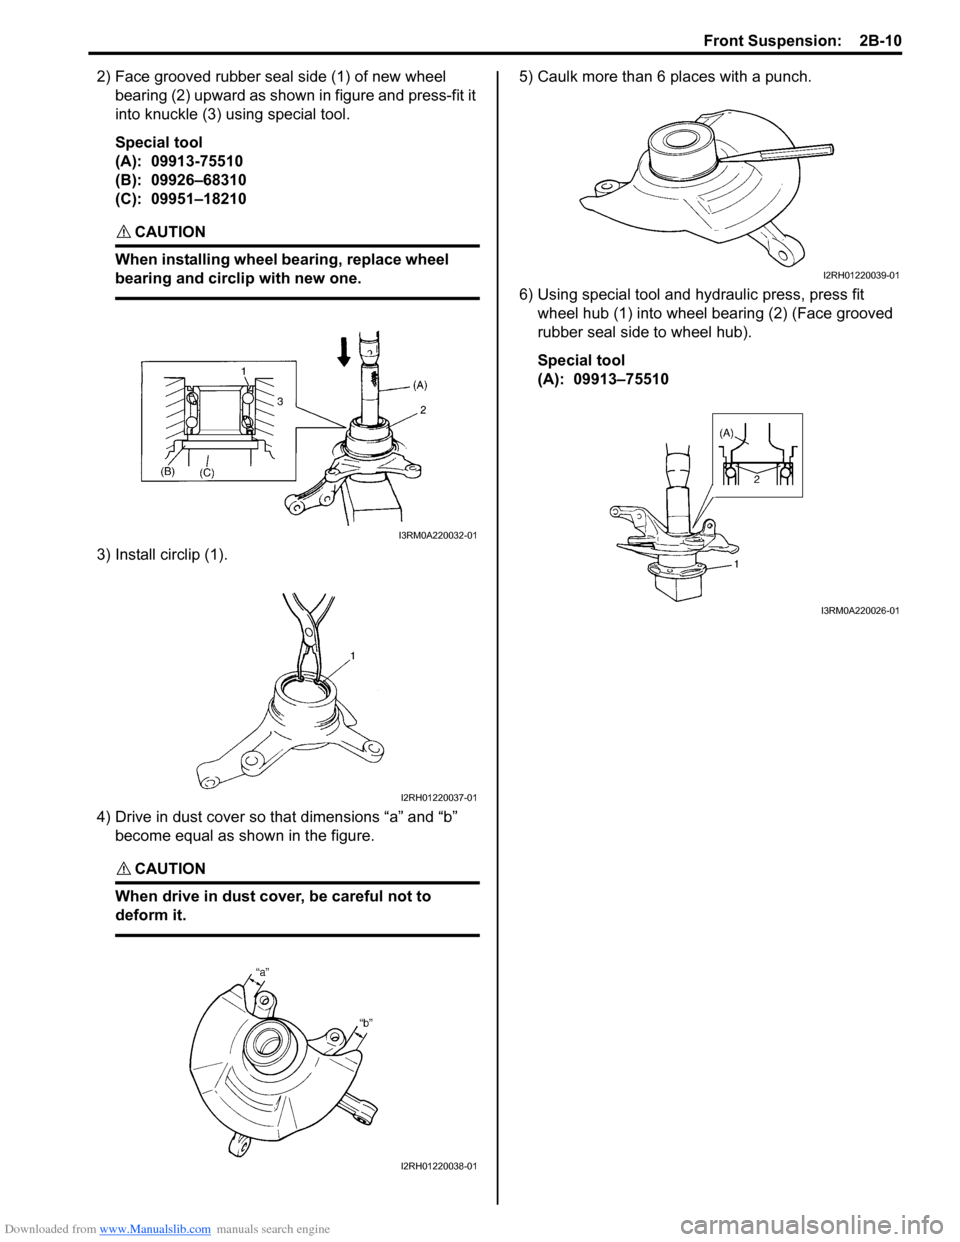 SUZUKI SWIFT 2006 2.G Service Workshop Manual Downloaded from www.Manualslib.com manuals search engine Front Suspension:  2B-10
2) Face grooved rubber seal side (1) of new wheel bearing (2) upward as shown in figure and press-fit it 
into knuckle